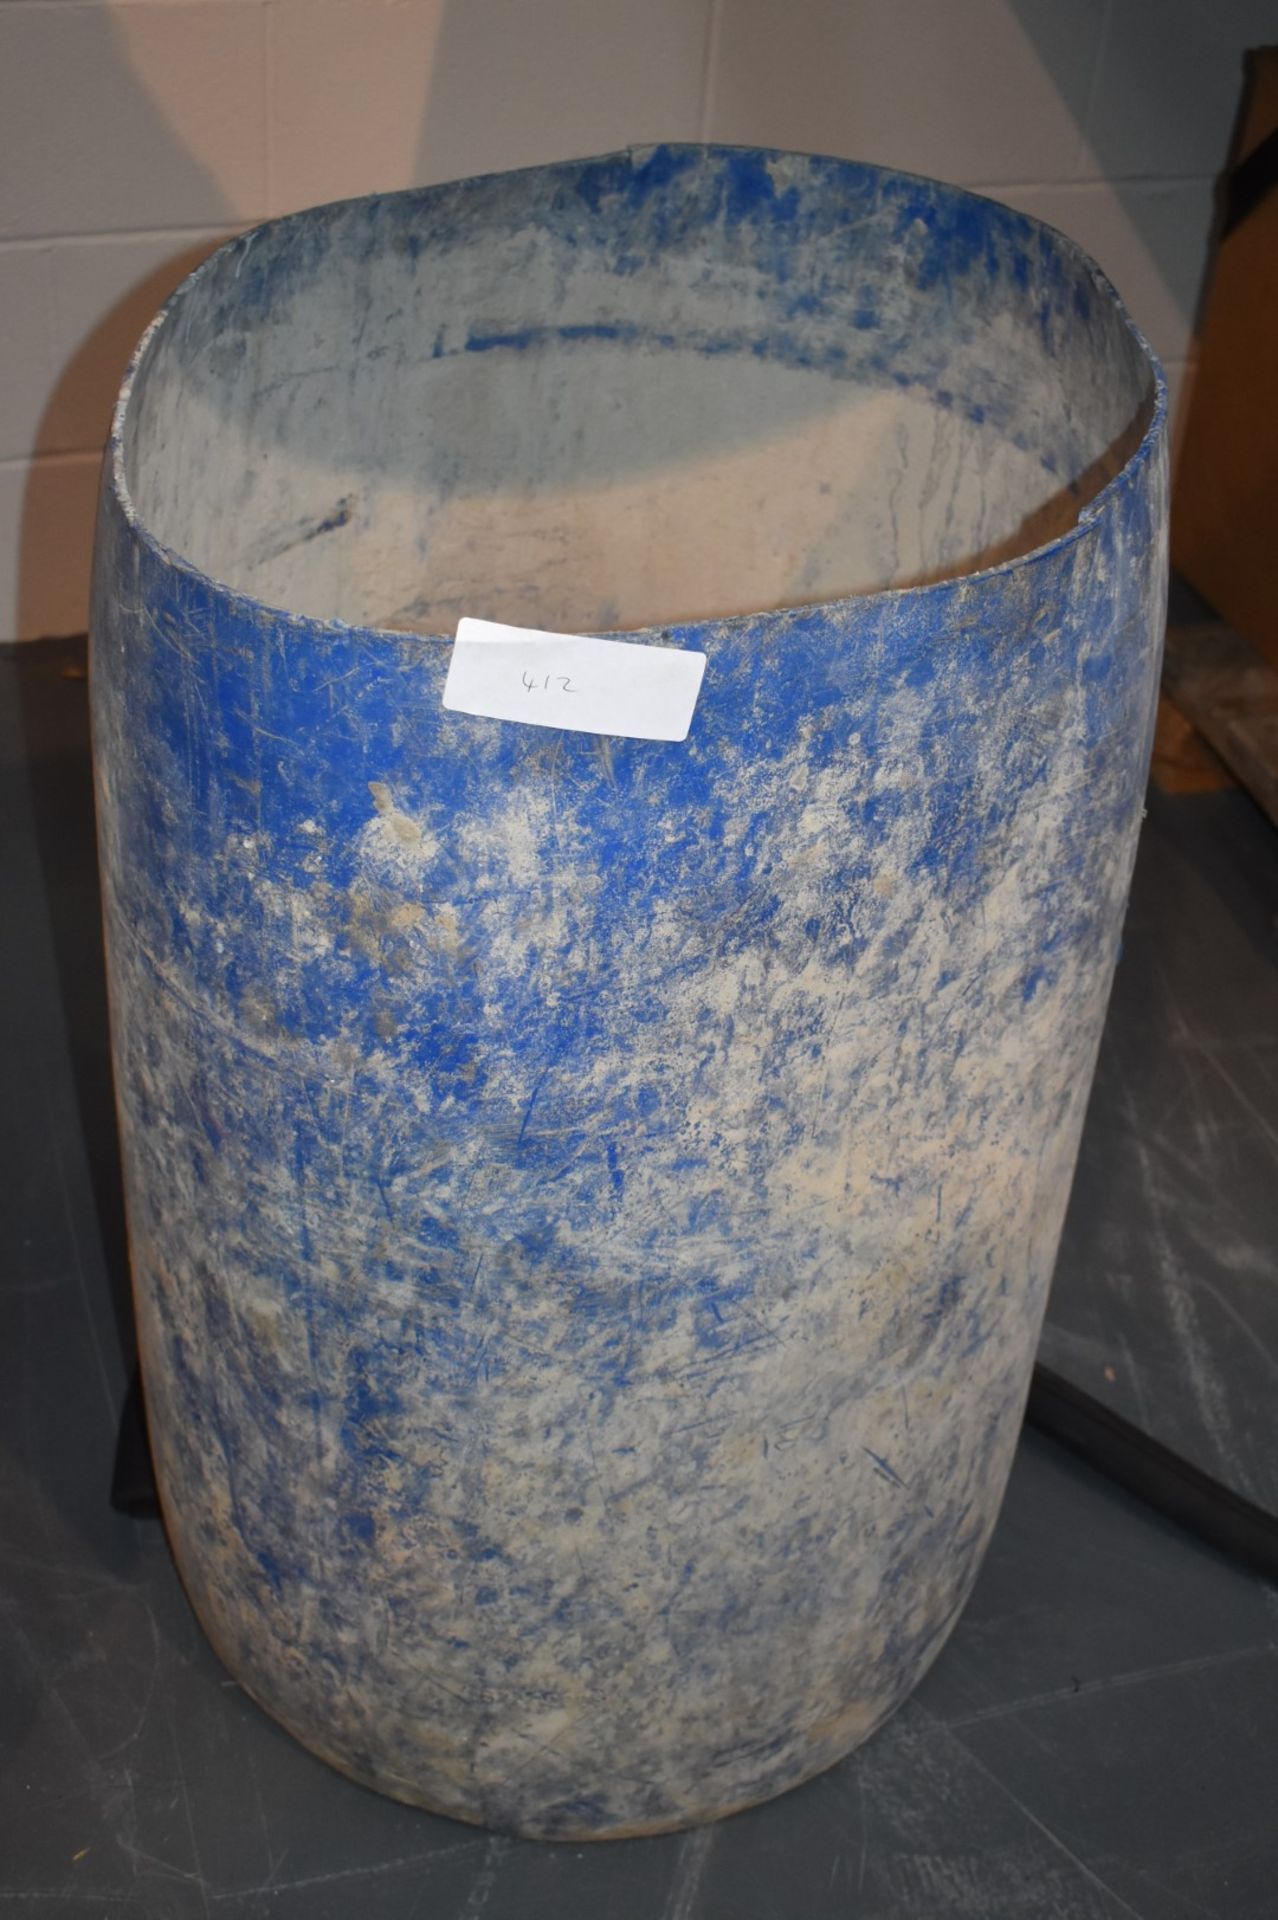 1 x Large Plastic Barrel - Previously Used to Collect Water - Ref 412 - CL501 - Location: Warrington